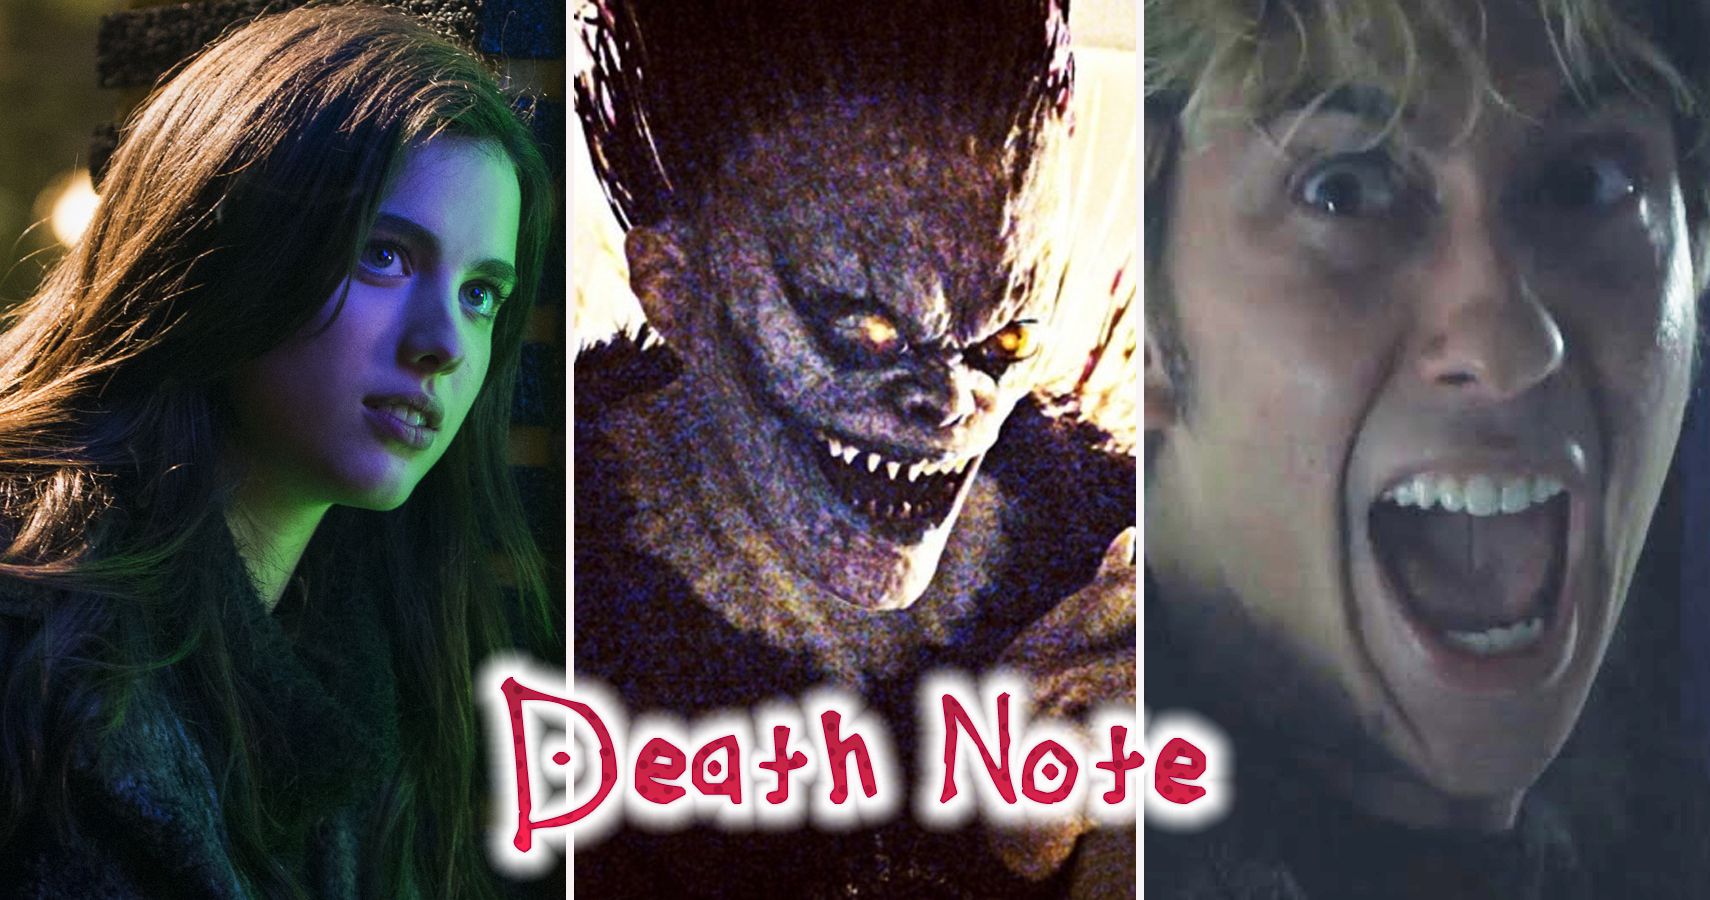 Netflixs Death Note 2 Is Alive & in Good Hands, Says Writer